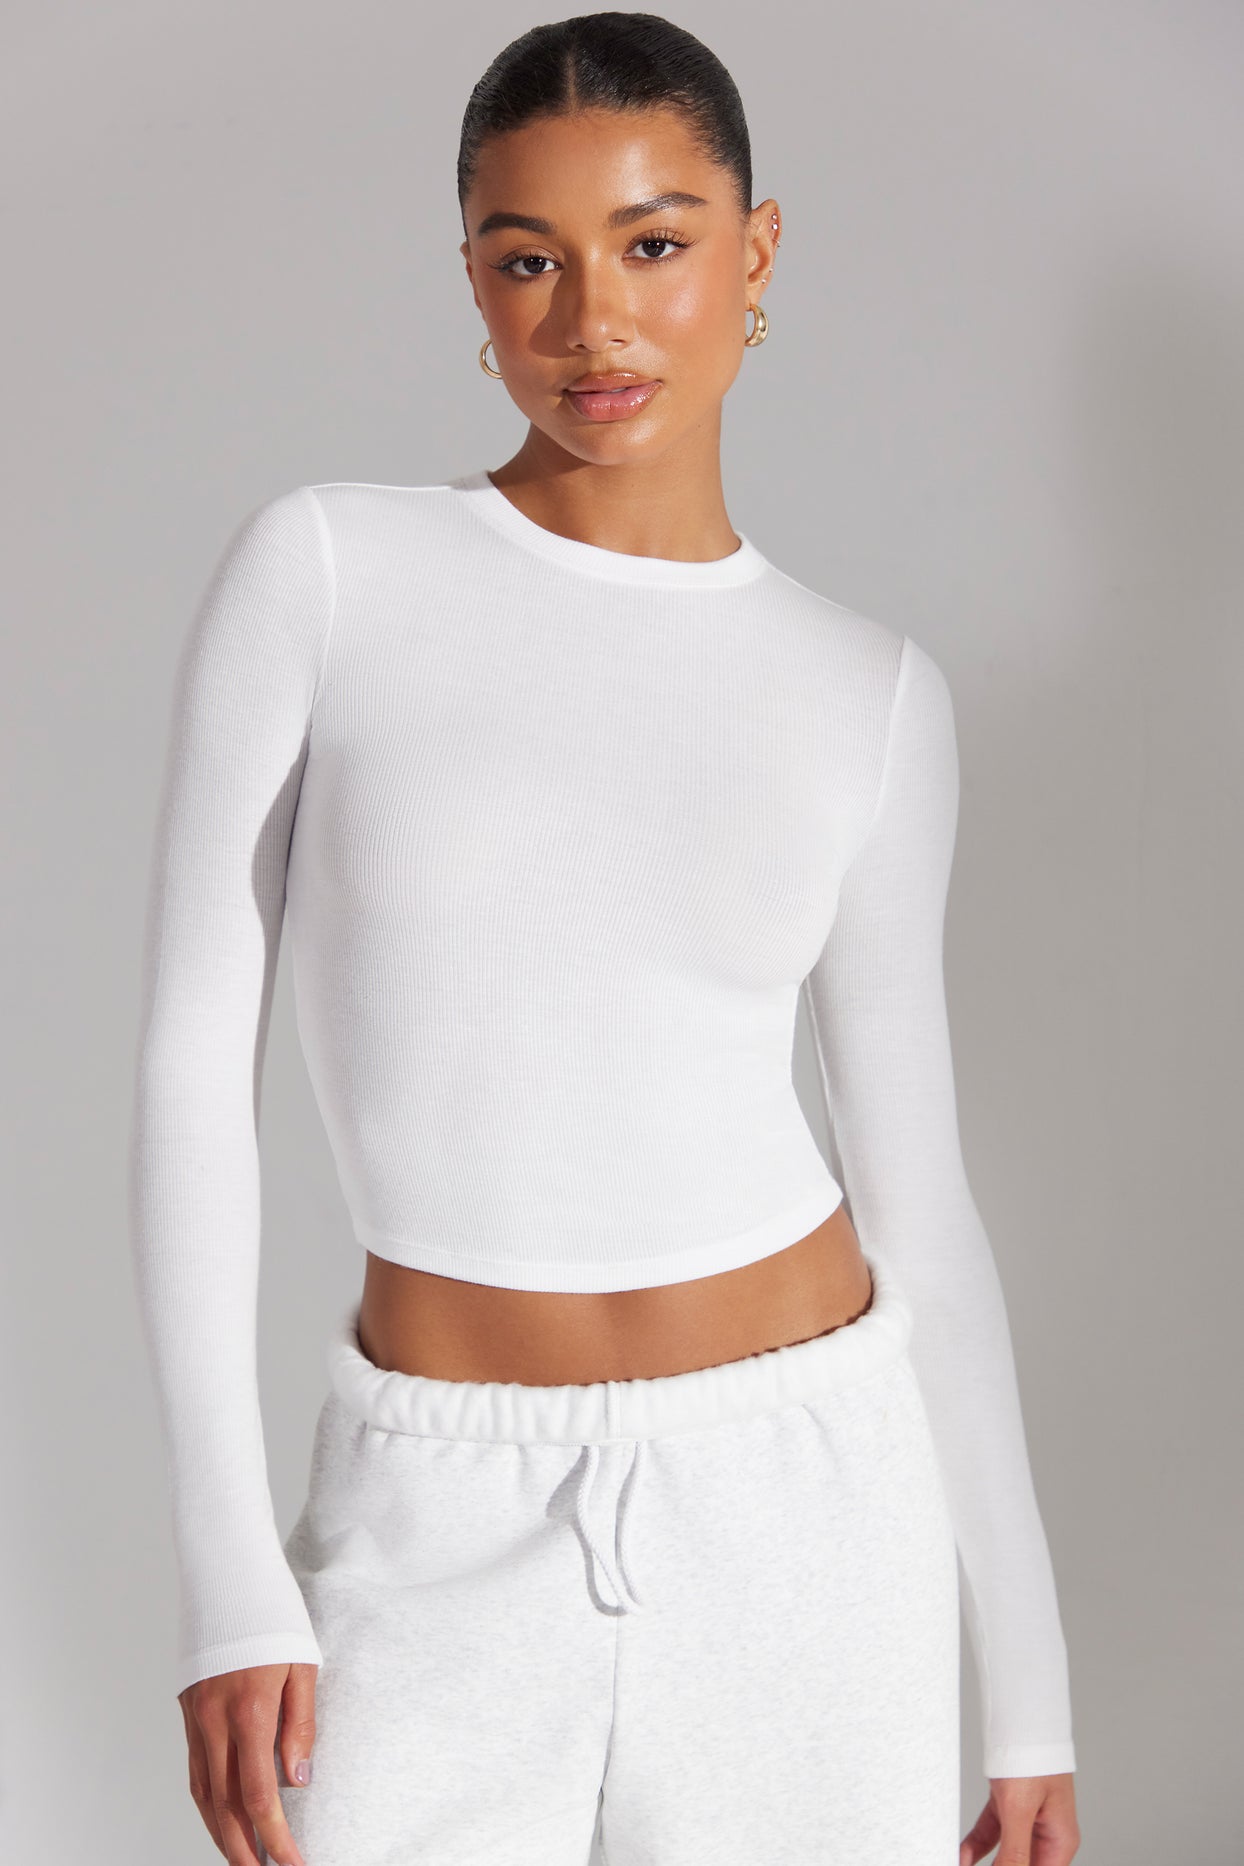 Soft Rib Long Sleeve Top in White